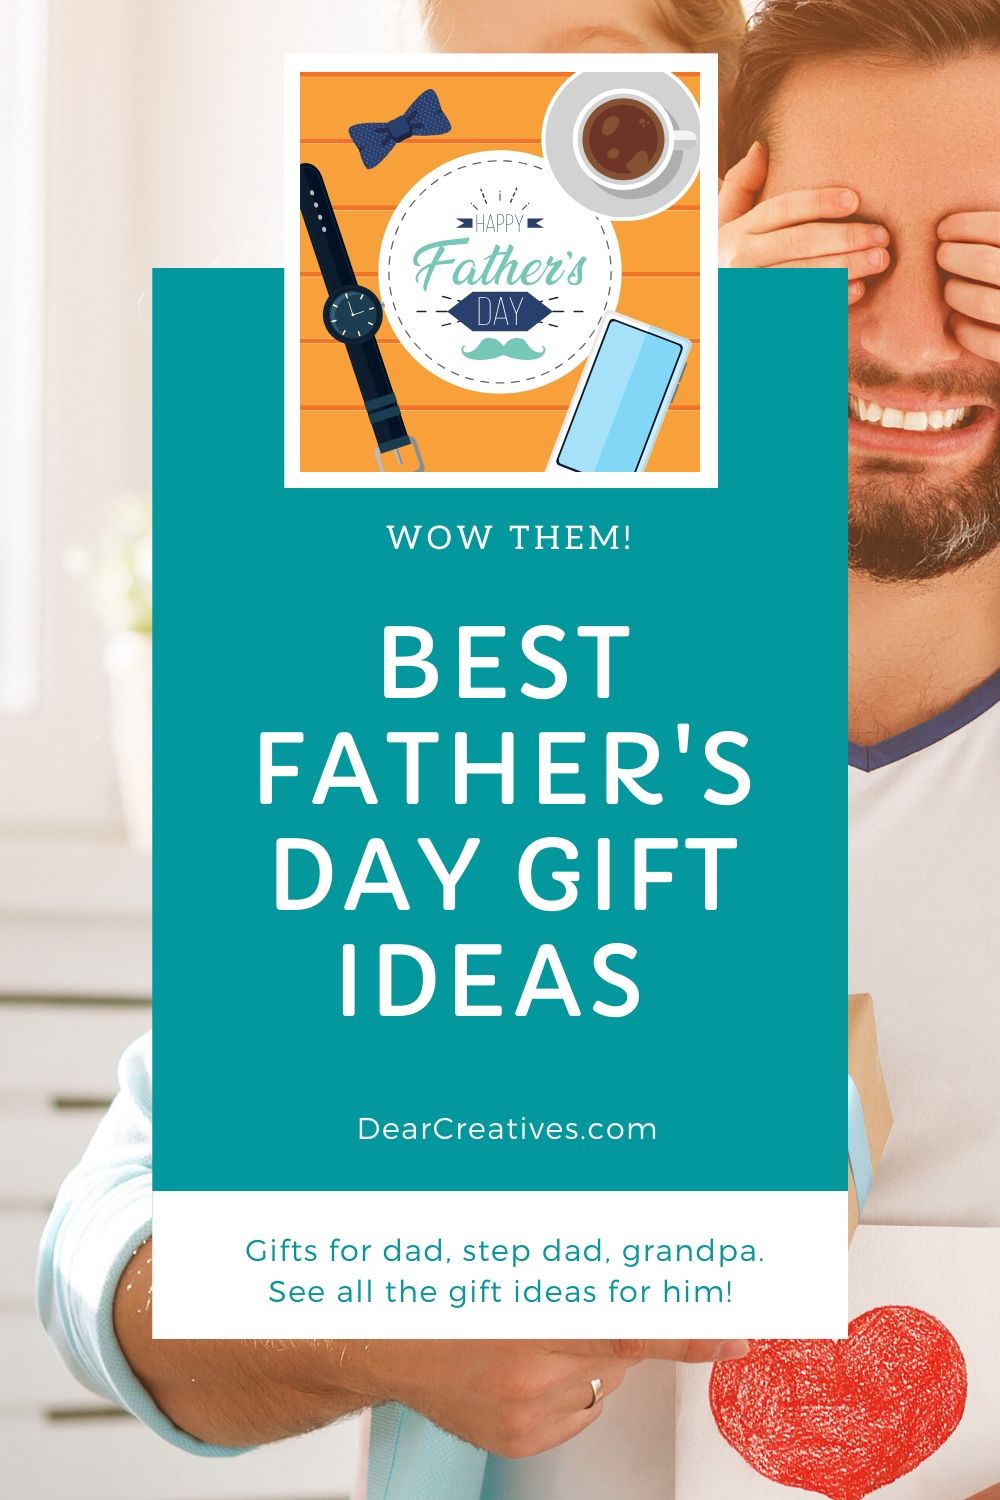 Father's Day Gift Ideas - These are the best gift ideas for him. See all the ideas and our favorite gifts for dad, stepdad and grandpa! DearCreatives.com